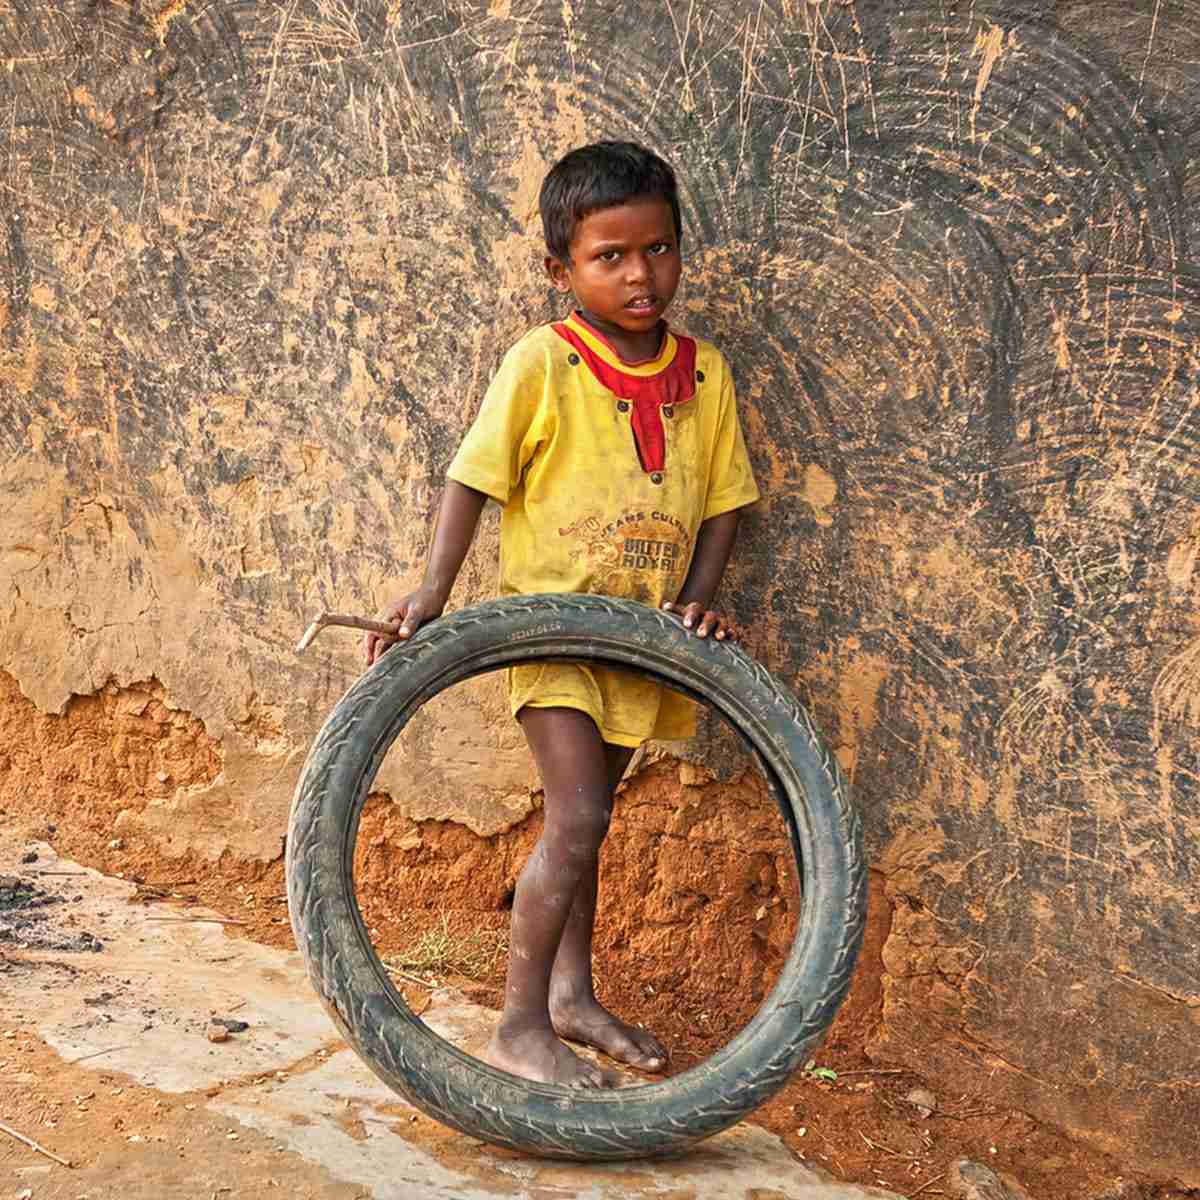 Many young children like this boy missed receiving an education due to poverty